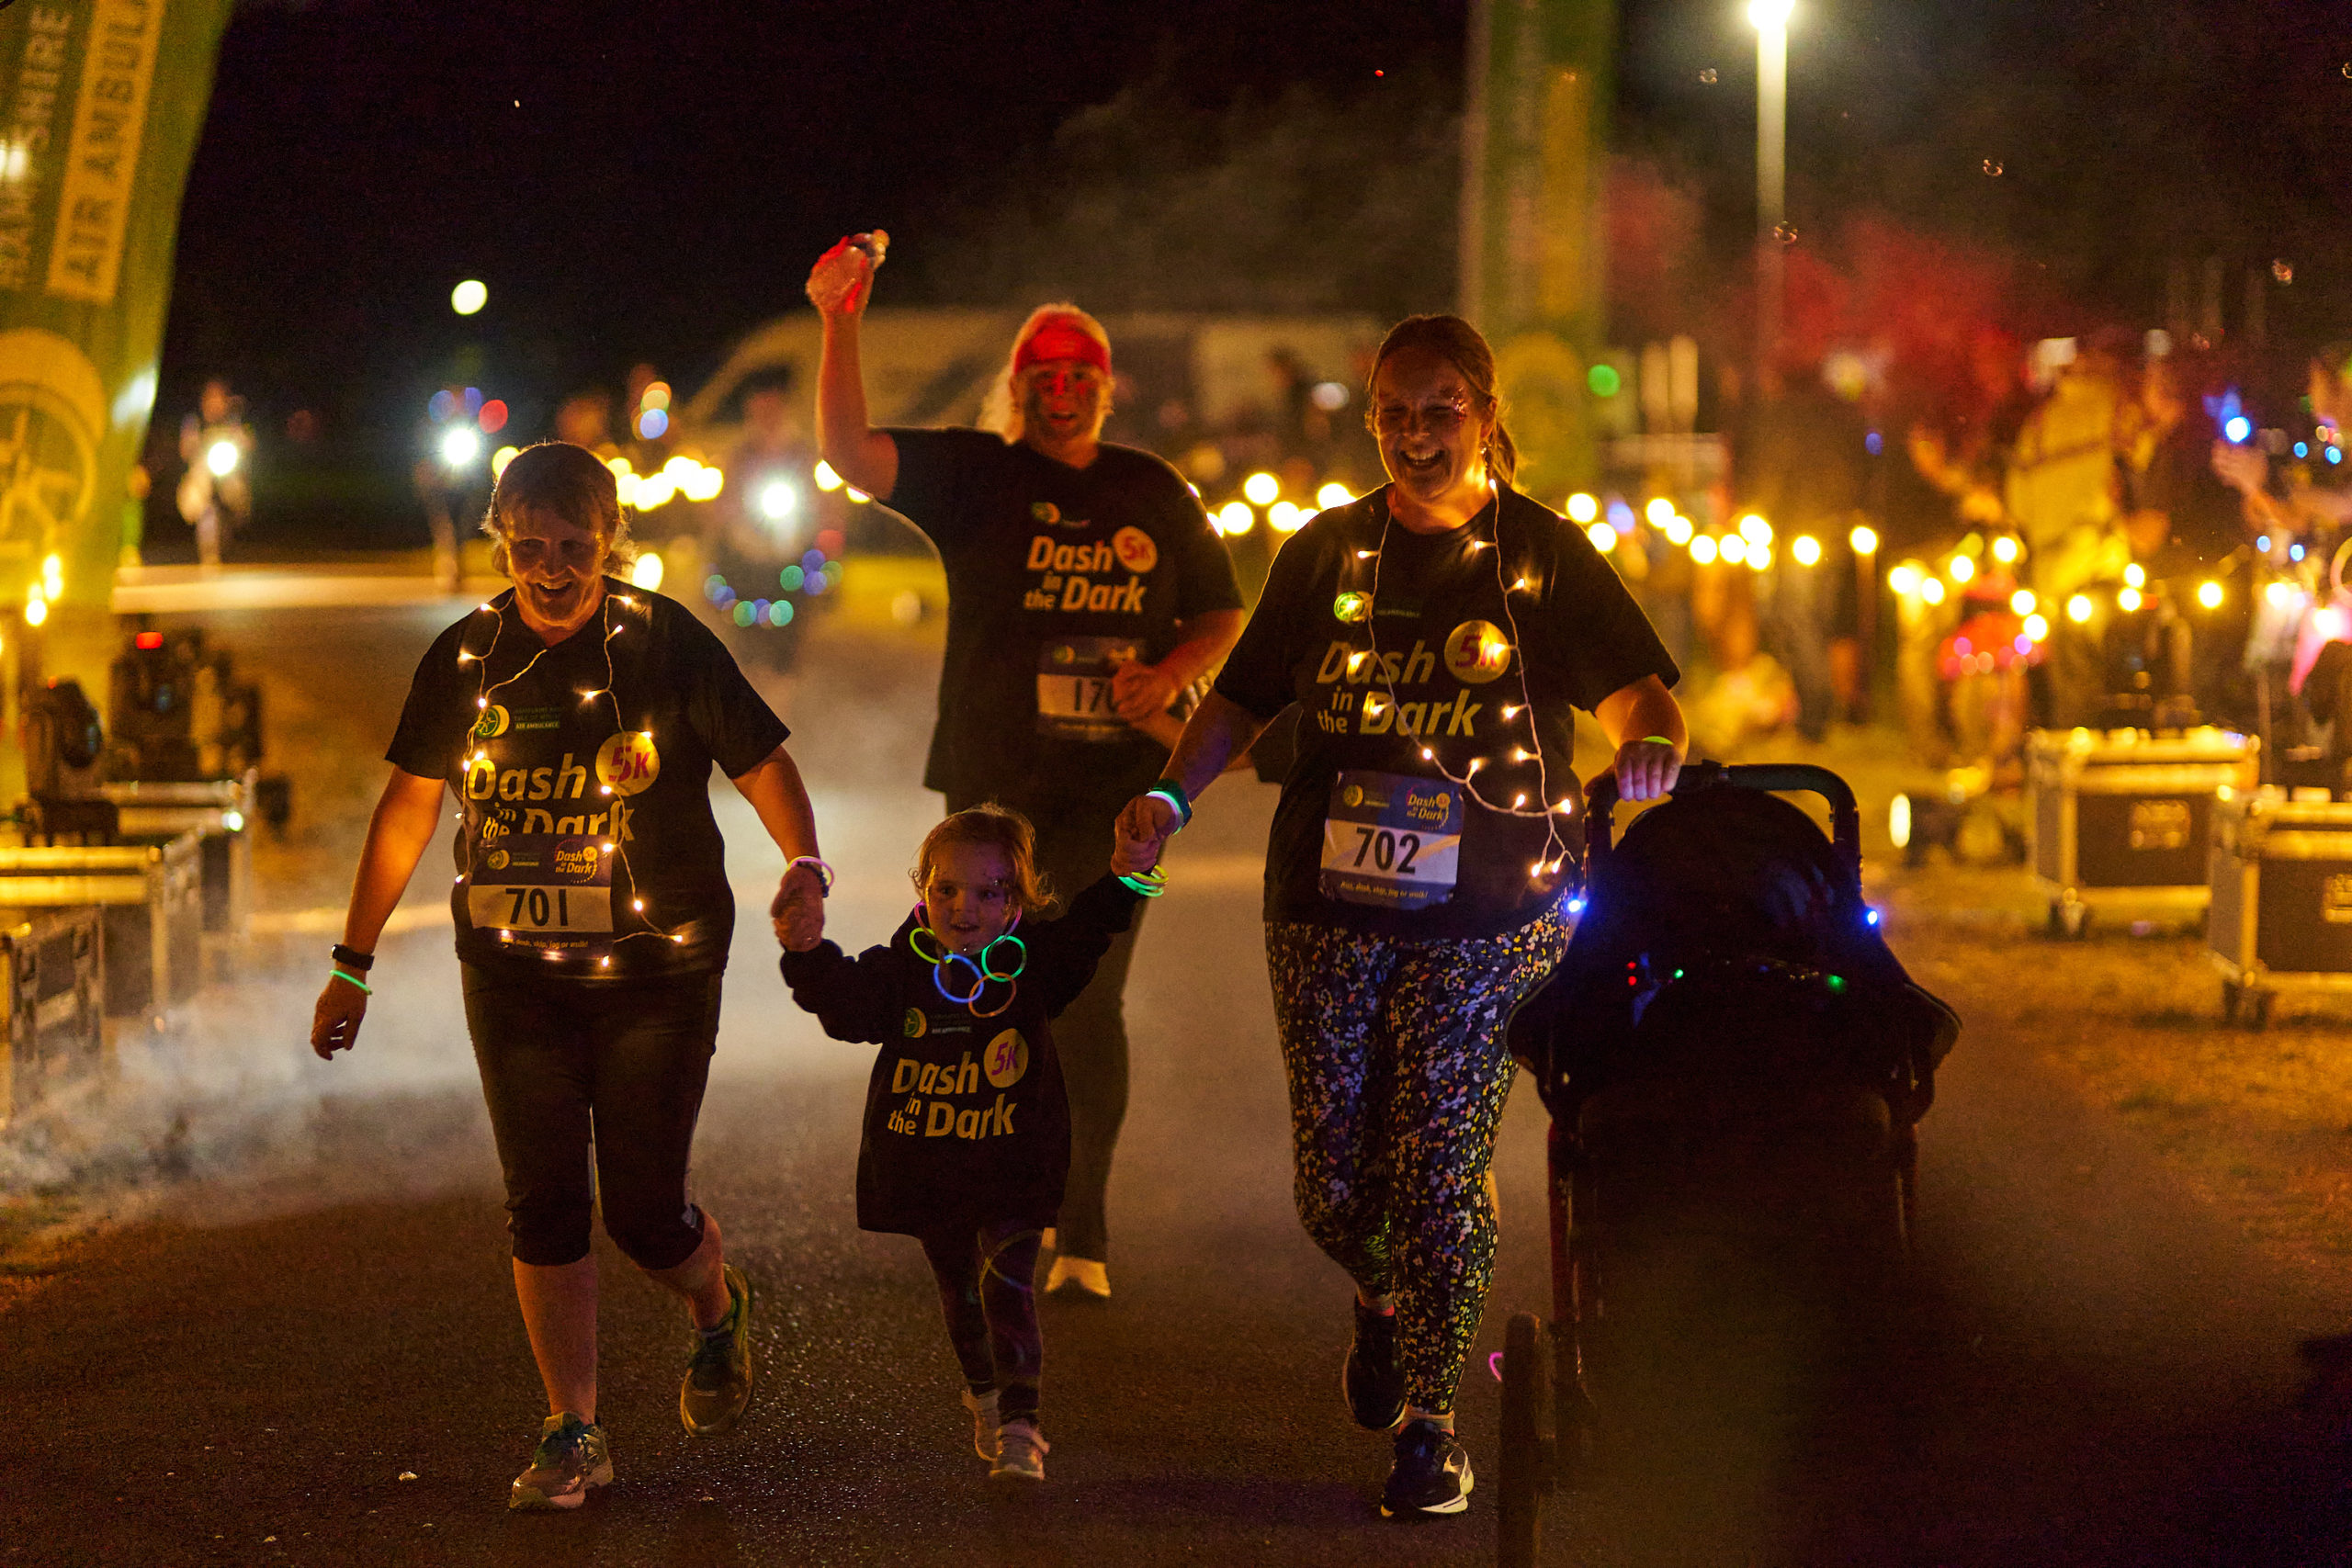 Four people draped in lights on a fun run - one lady pushing a child's buggy